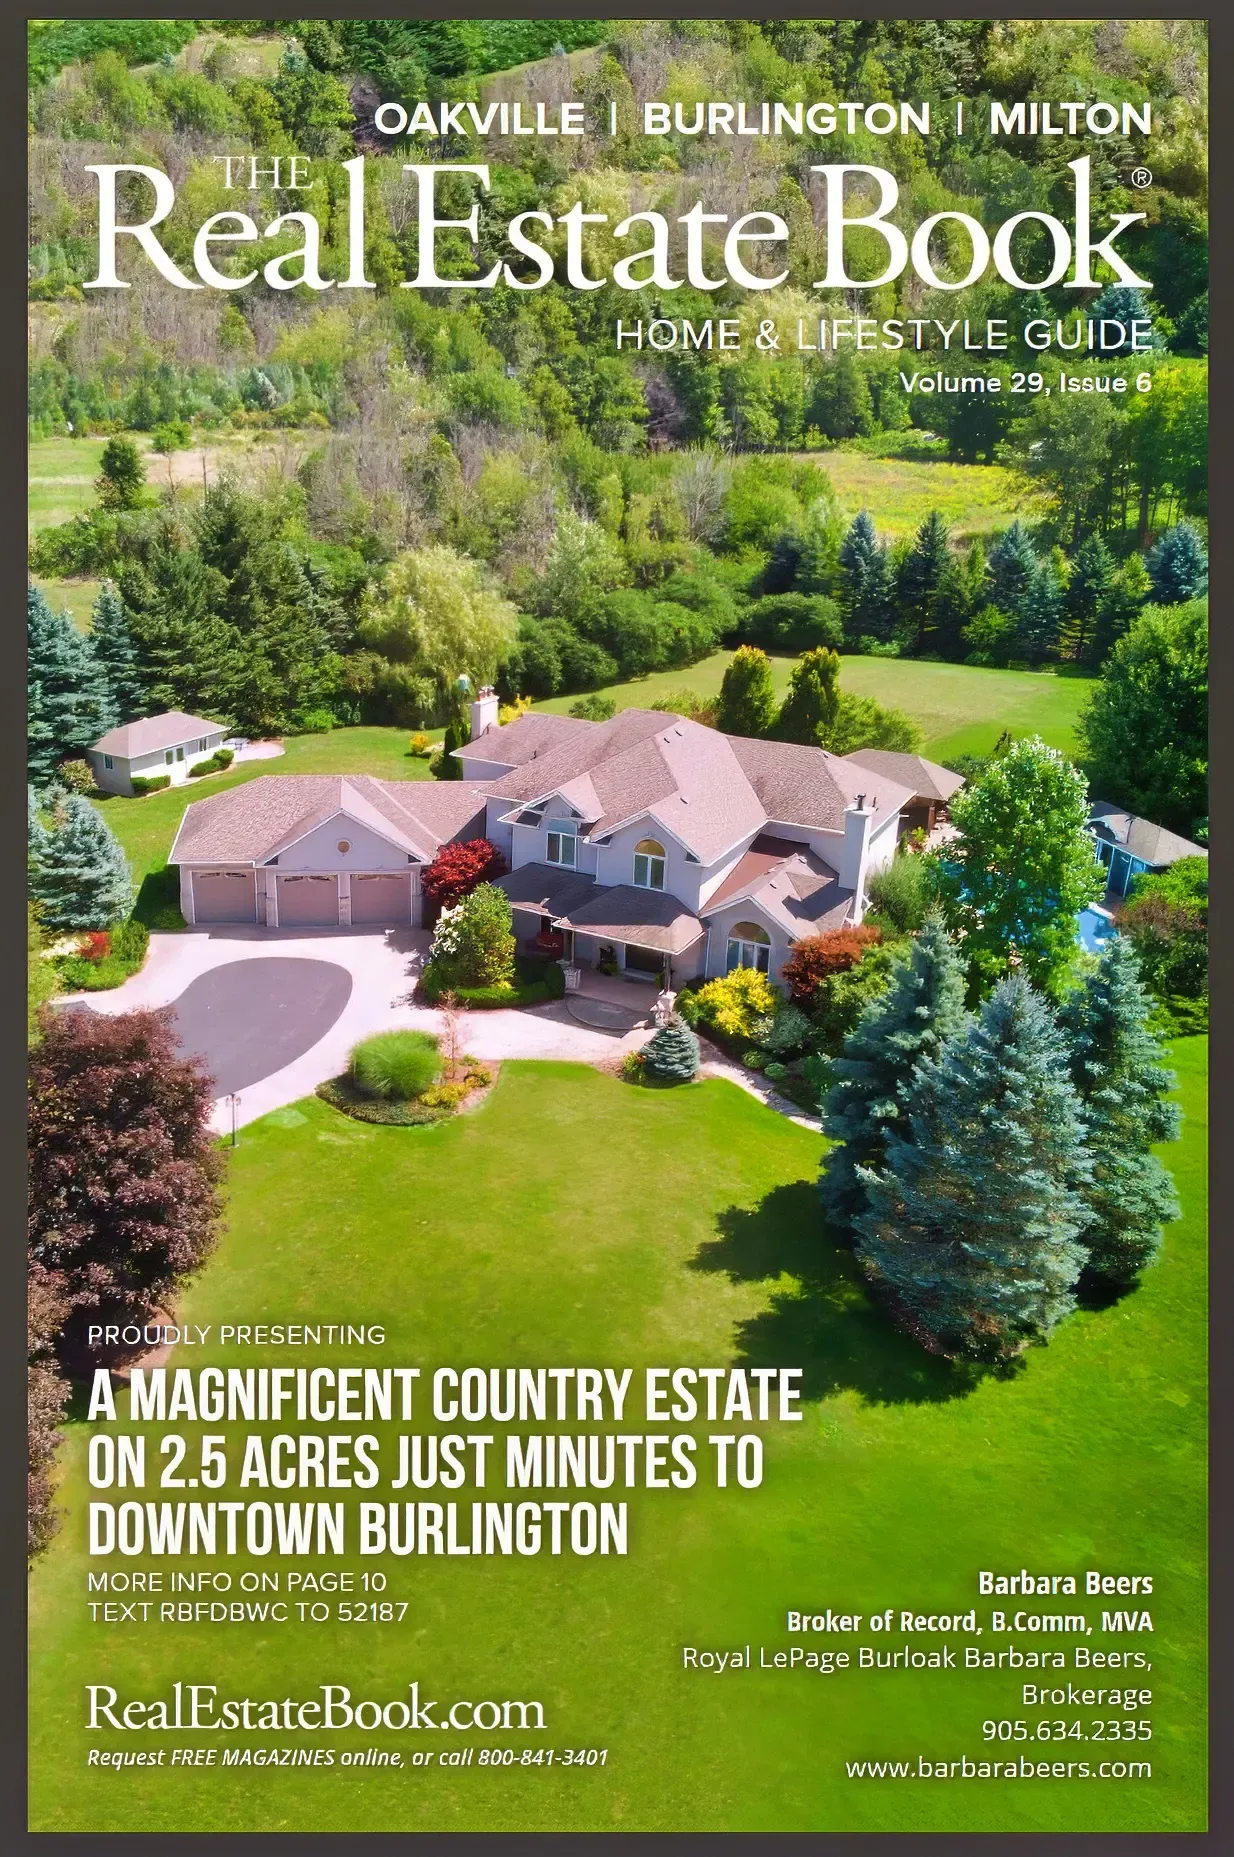 Drone photograph of a real estate listing featured on the cover of The Real Estate Book